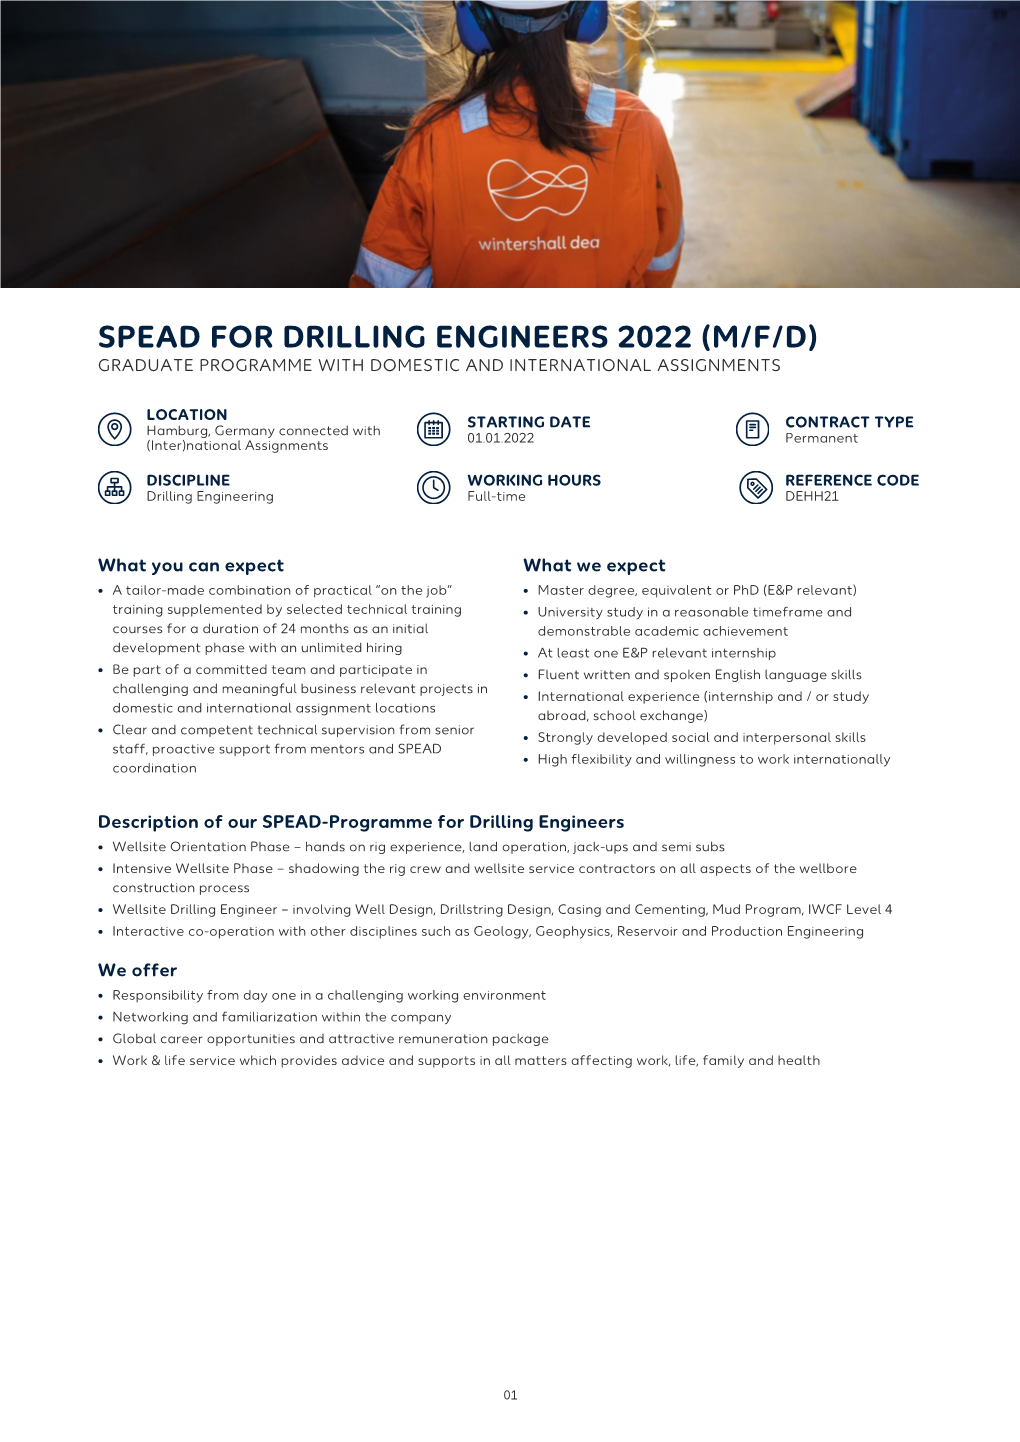 Spead for Drilling Engineers 2022 (M/F/D) Graduate Programme with Domestic and International Assignments